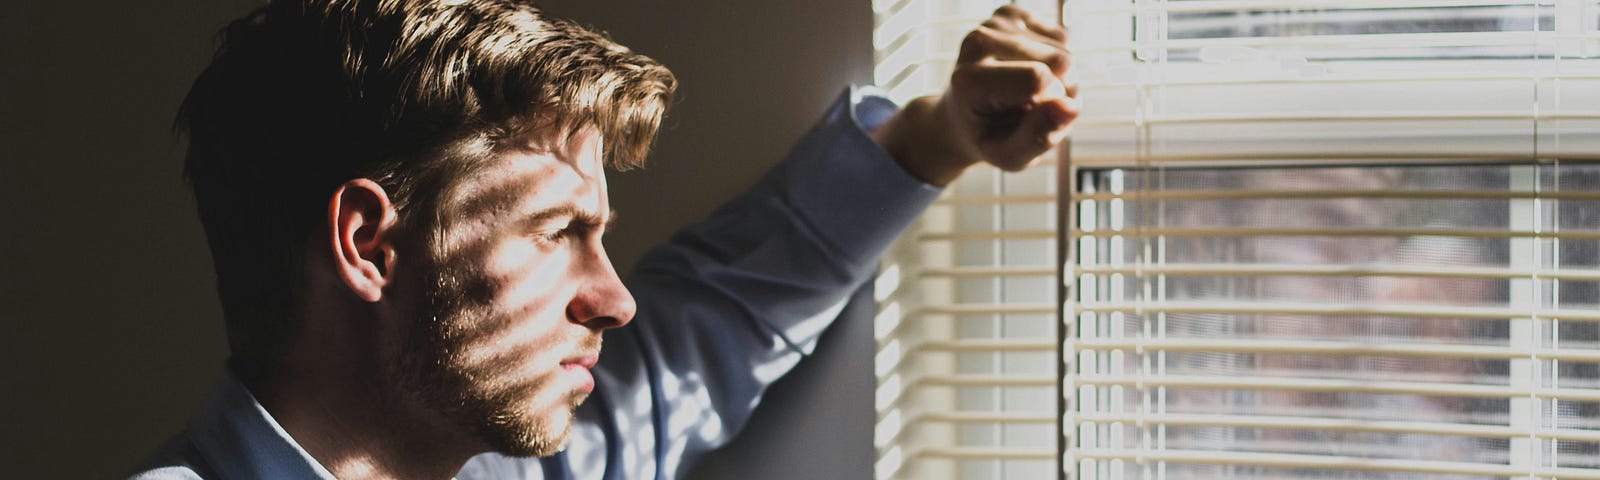 A contemplative man gazes out of a sunlit window, blinds casting striped shadows across his face and shirt.